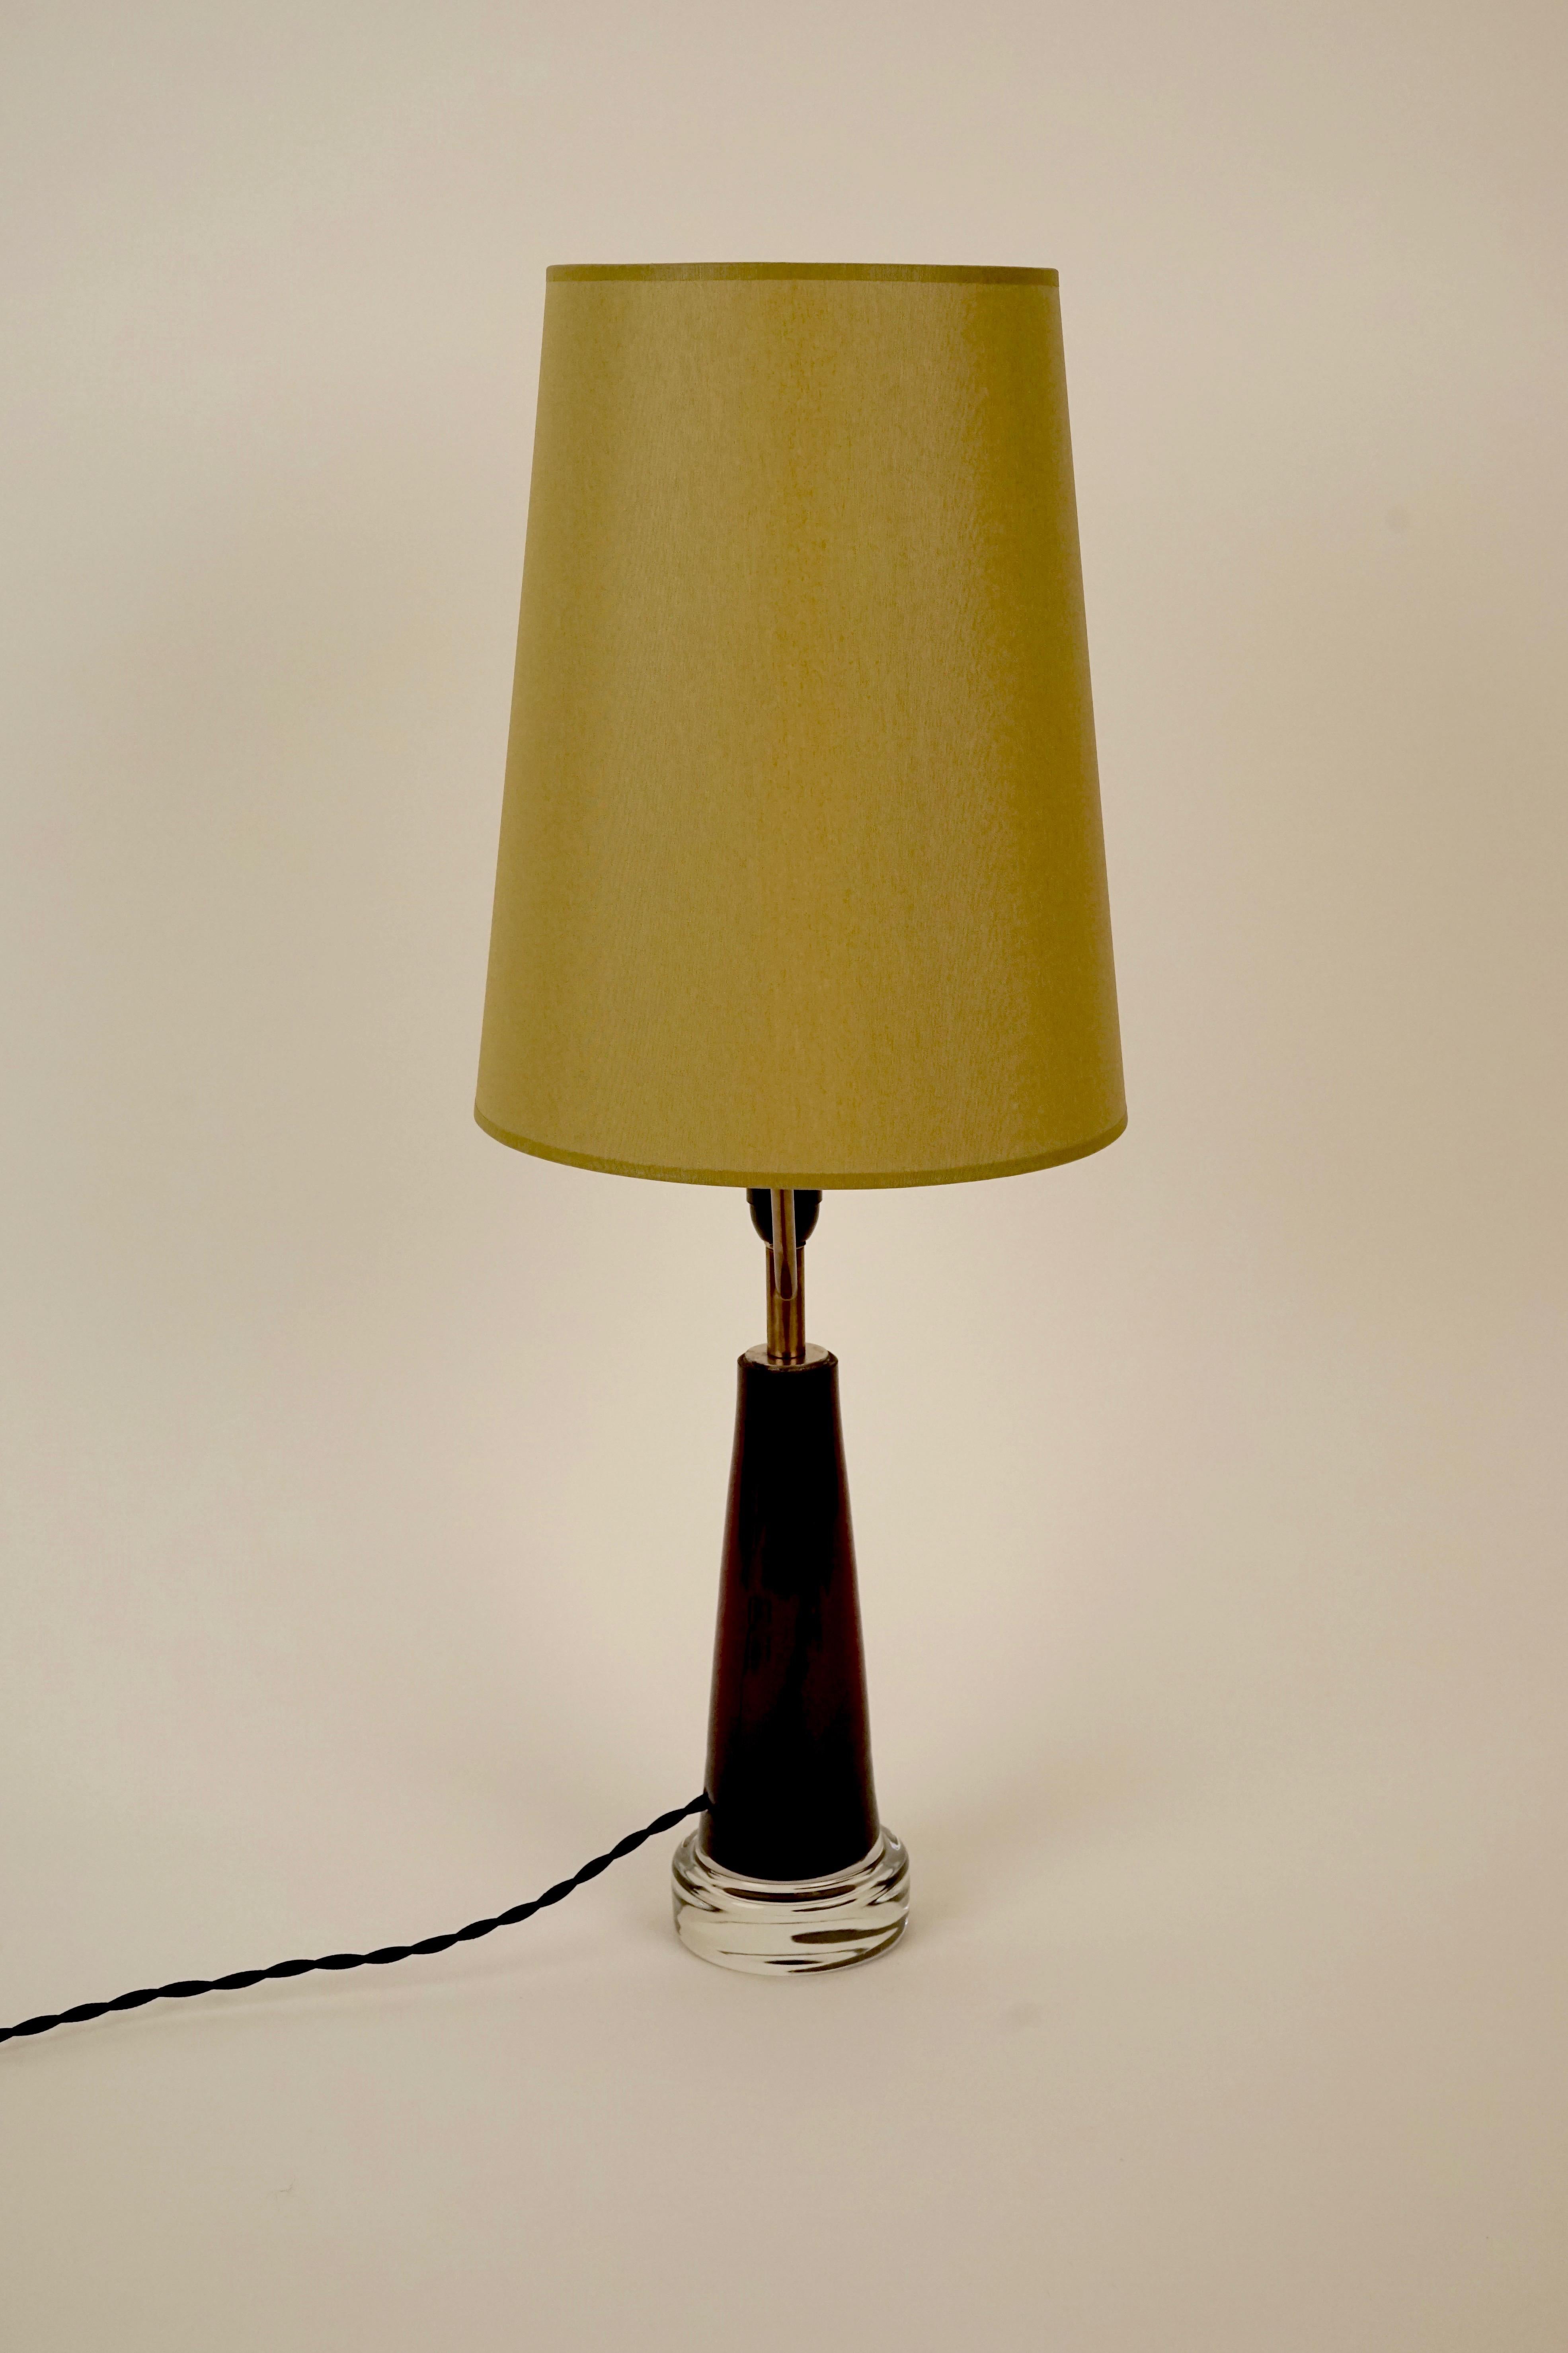 The glass base of the lamp is hand crafted in deep Bordeaux color. 
The shade is new, made in green silk.
The textile cable runs through the glass base and adds a nice detail.
The shade support is made in brass.